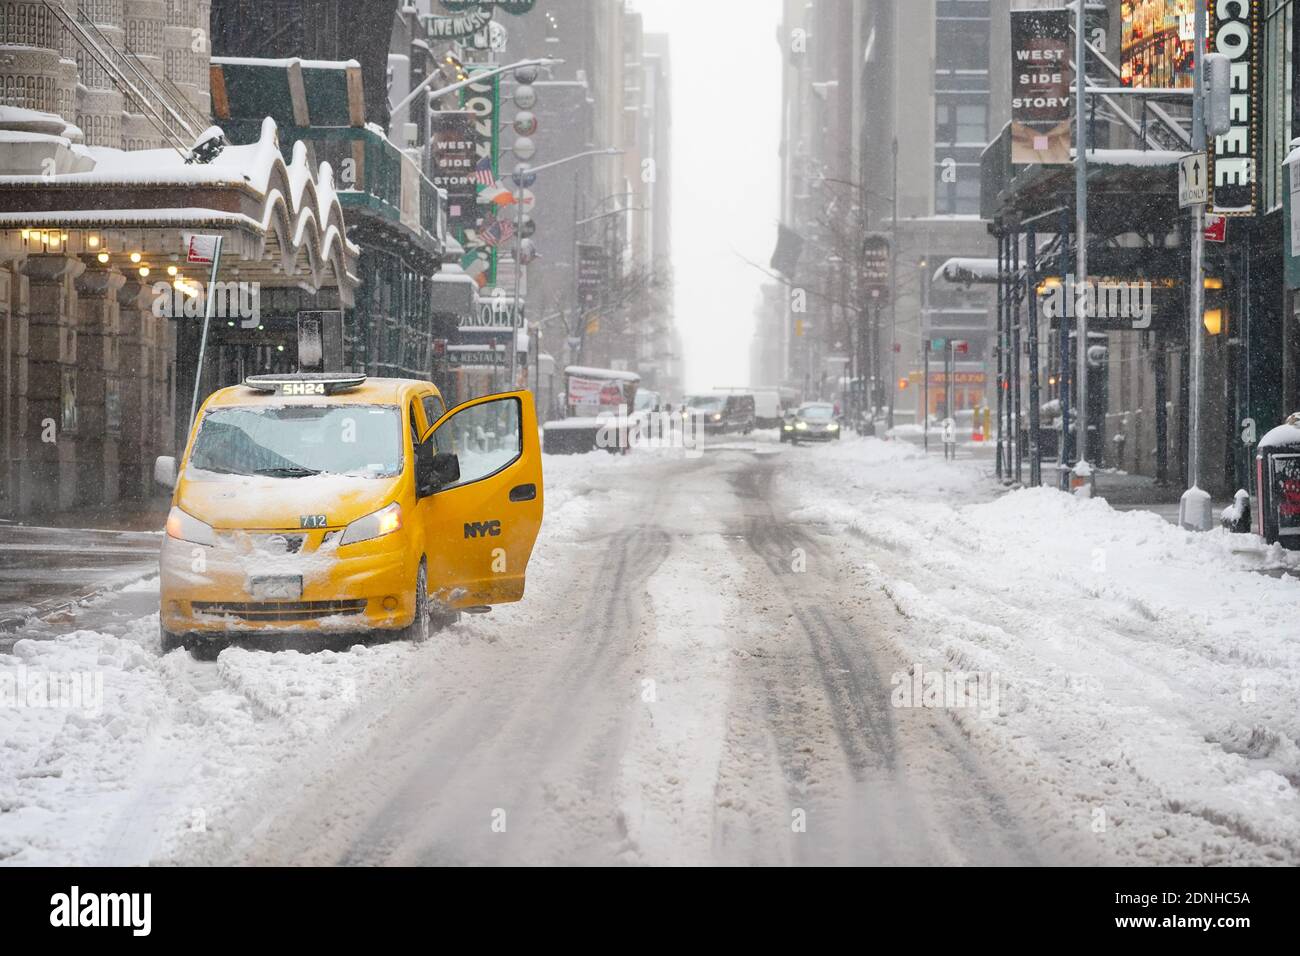 A view of a snow-covered NYC yellow cab during a winter storm.The morning  after a powerful winter storm hit the US northeastern states, a major  snowstorm hit the US east coast during